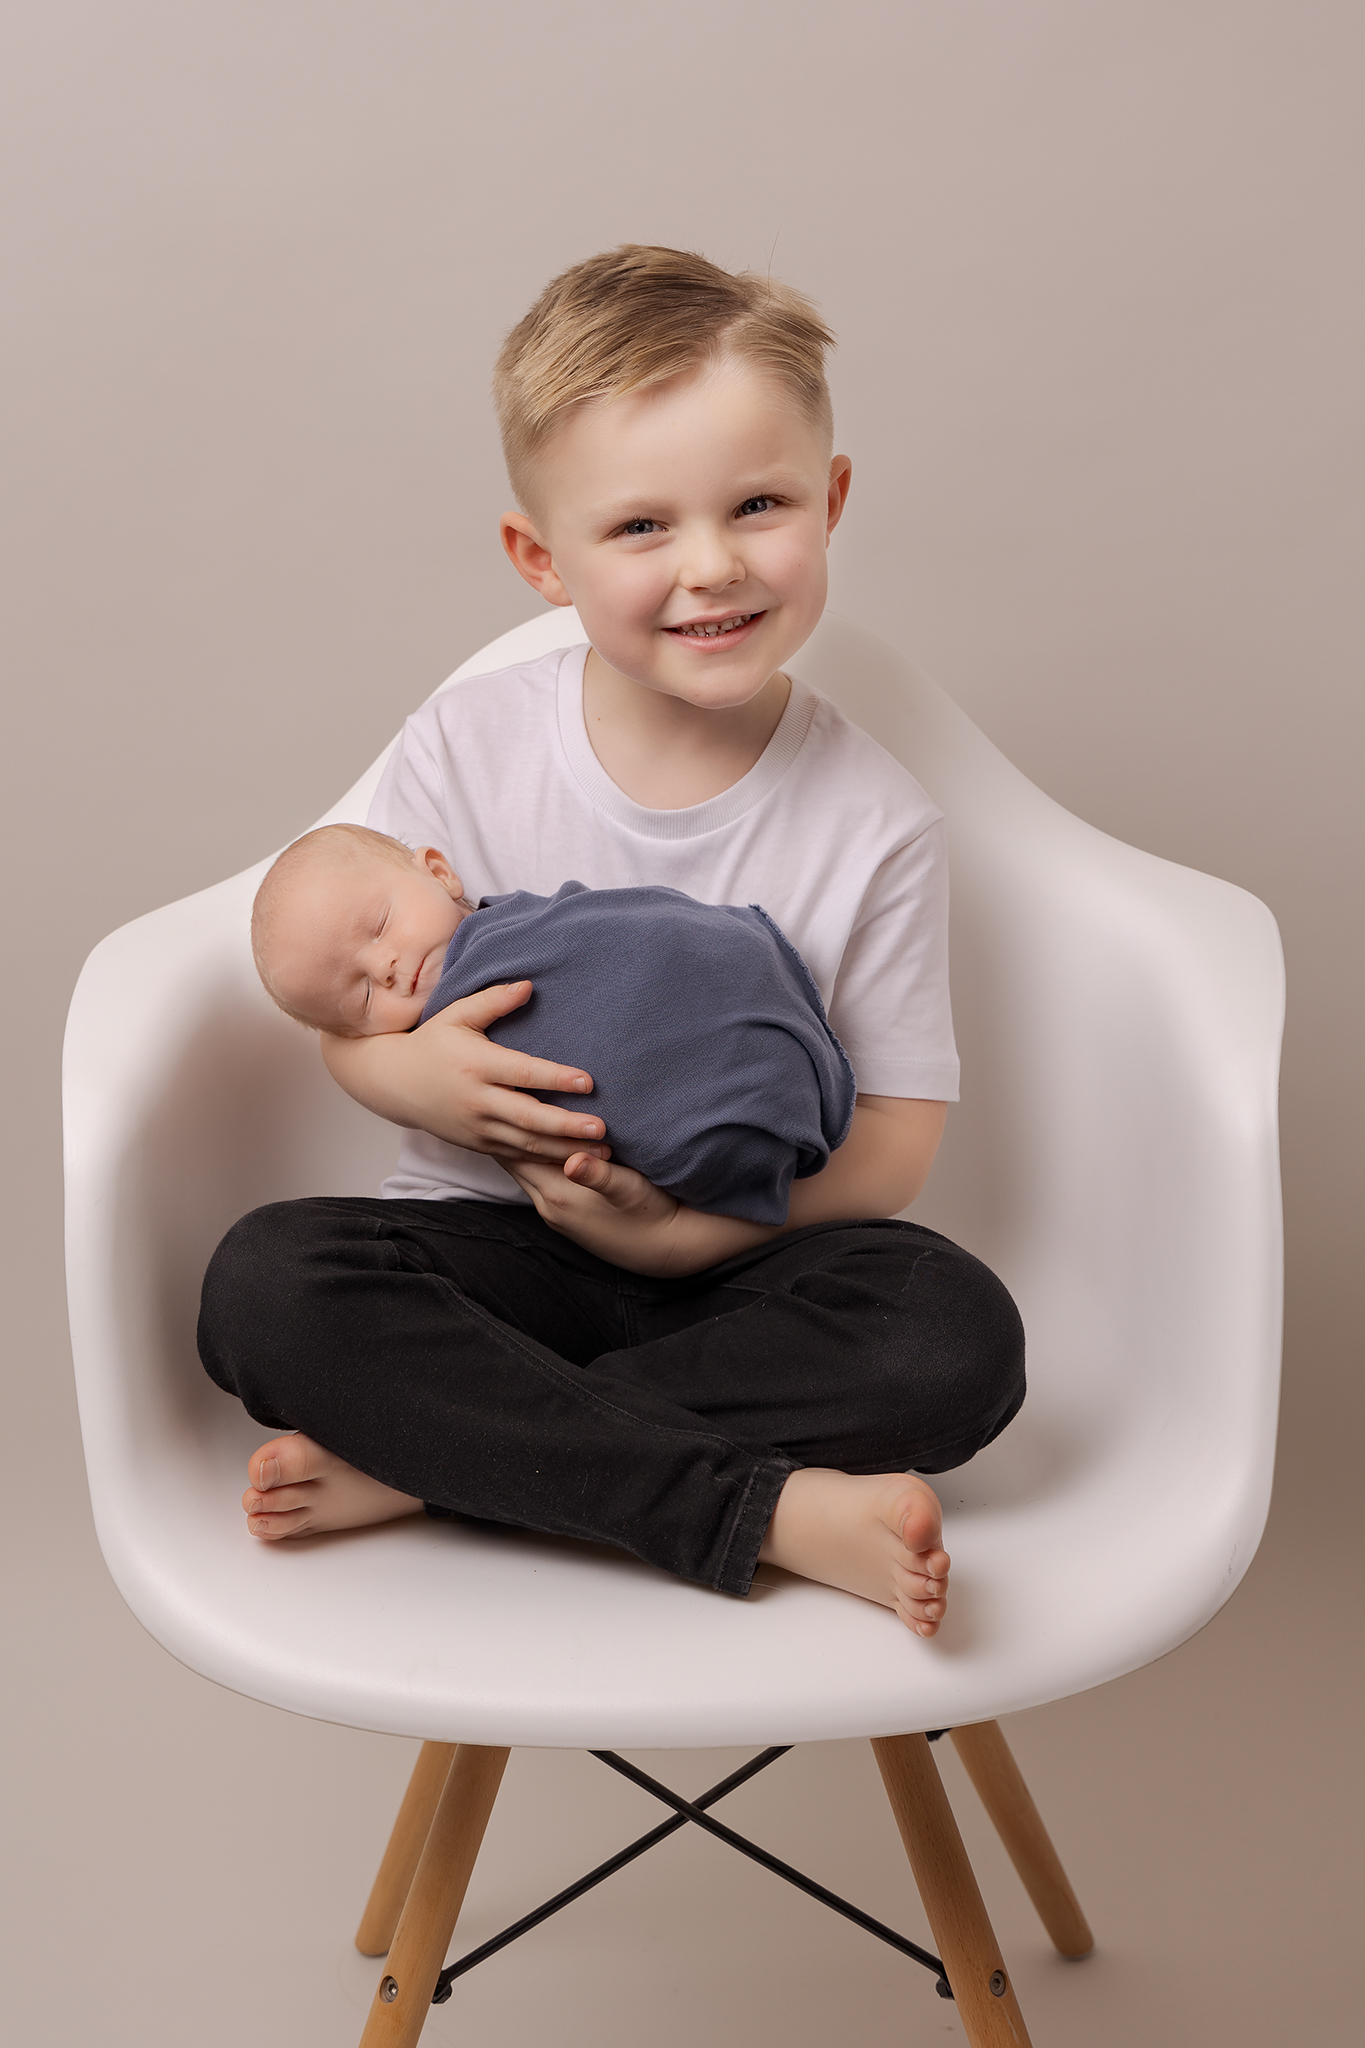 newborn and sibling<br />
baby photographer sutton coldlfield<br />
baby photographer birmingham